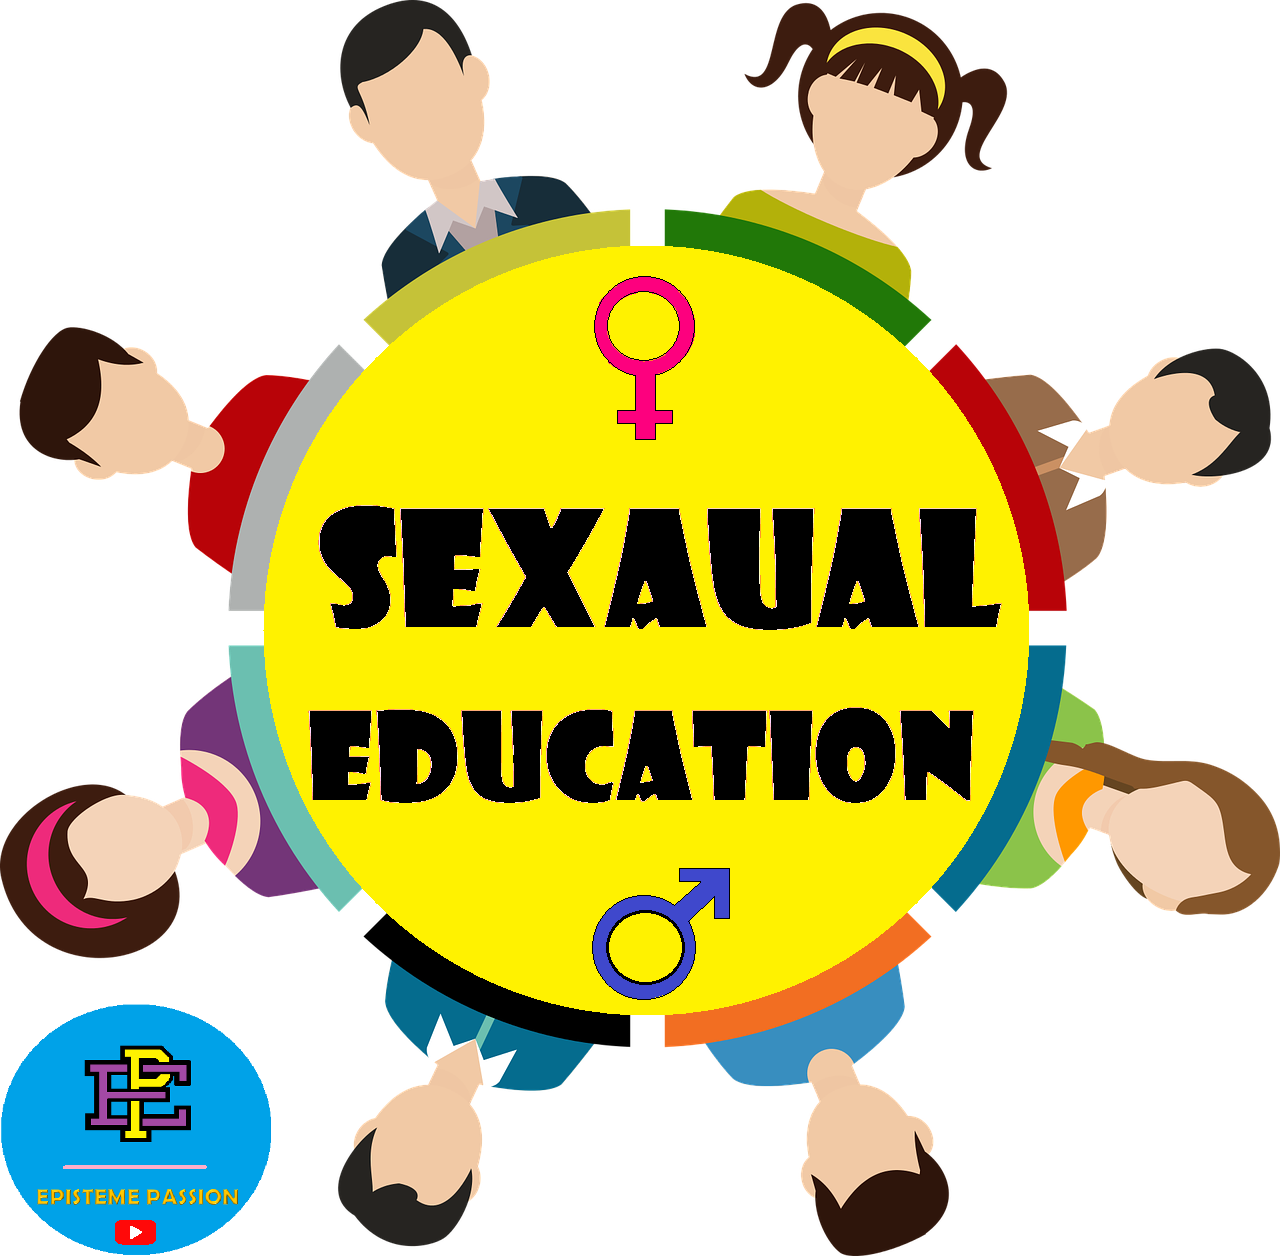 specific topic about sex education